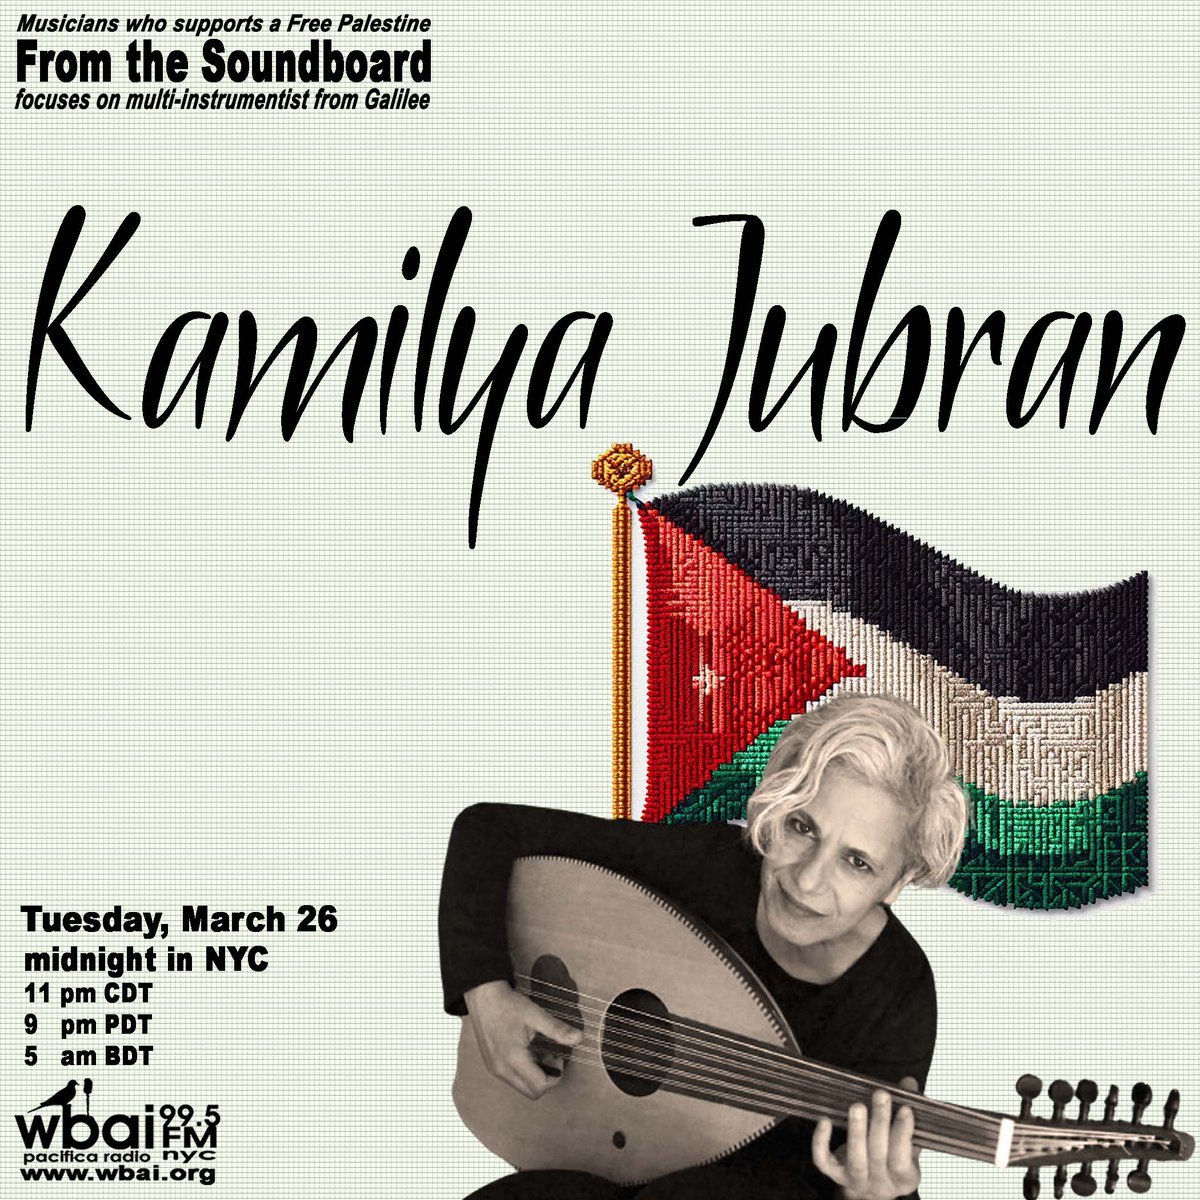 #FromtheSoundboard continues focusing on musicians who support a #FreePalestine  by focusing on #multiinstrumentalist from #Palestine @KamilyaJubran Tues, Mar 26 at midnight (that's Monday into Tuesday) @WBAI @fusicology #WomenHistoryMonth